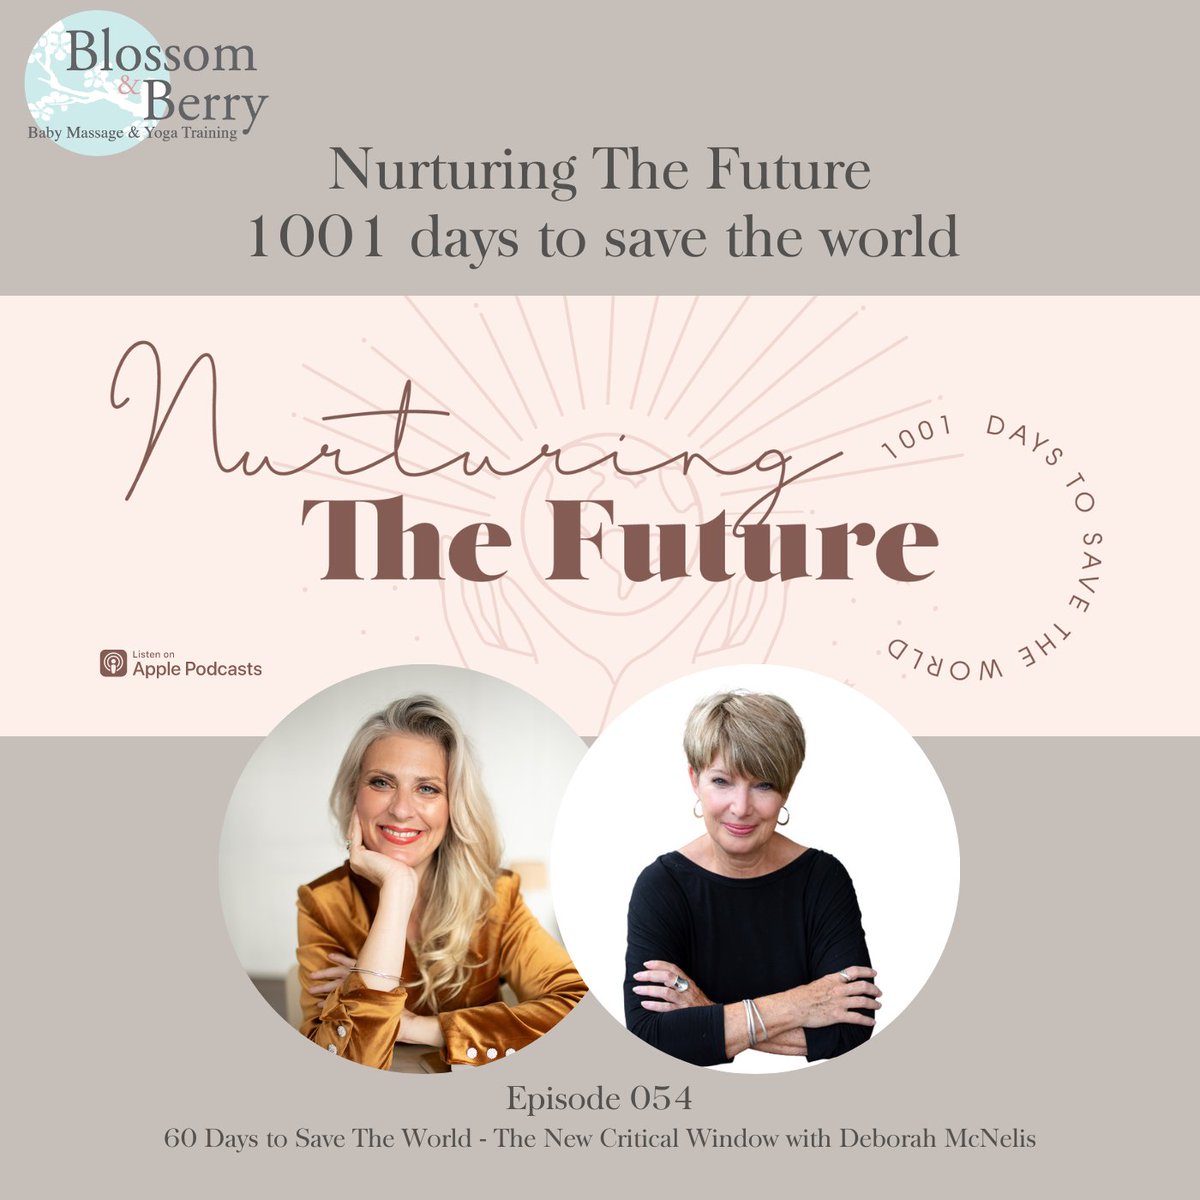 You are invited to enjoy this wonderful discussion with @blossomandberry about the incredibly positive influence we can make in the first 60 days of life! Research has revealed the remarkable difference nurturing responsiveness and support of caregivers in the first 2 months of